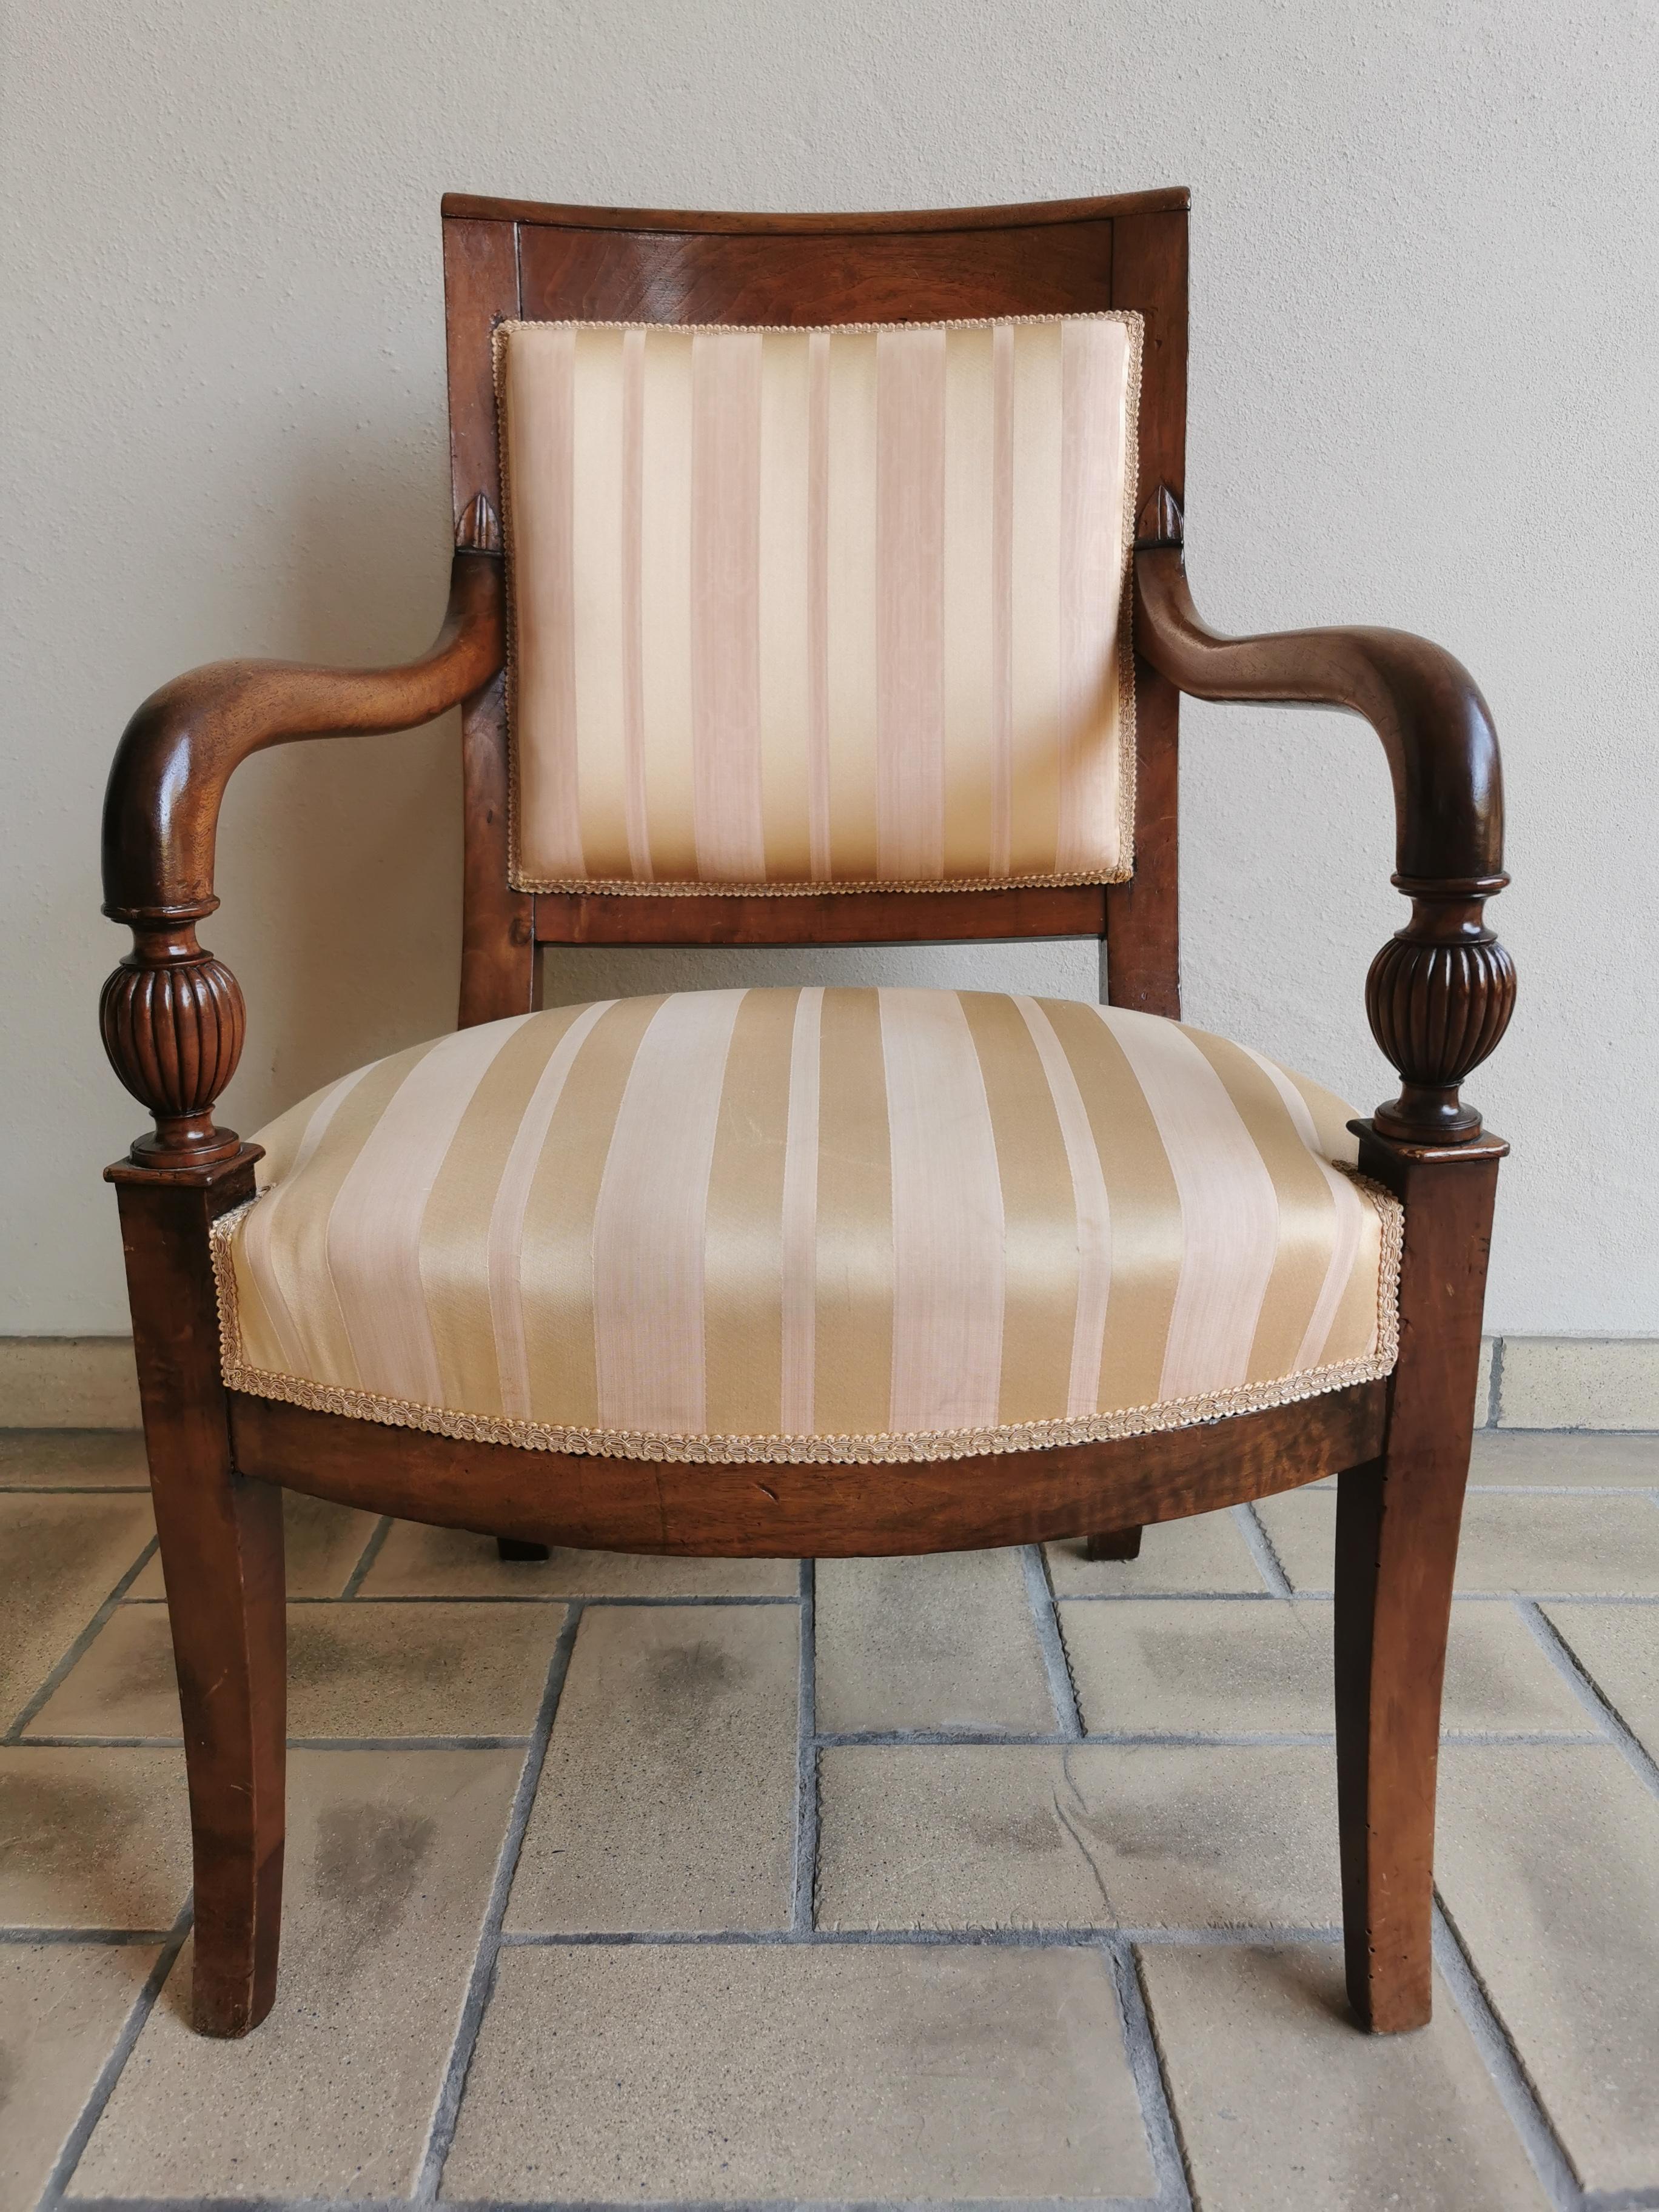 Charles X armchair-office chair in walnut and silk ca 1830 
in very good condition 
particular and rare piece
seller location :Torino Italy.